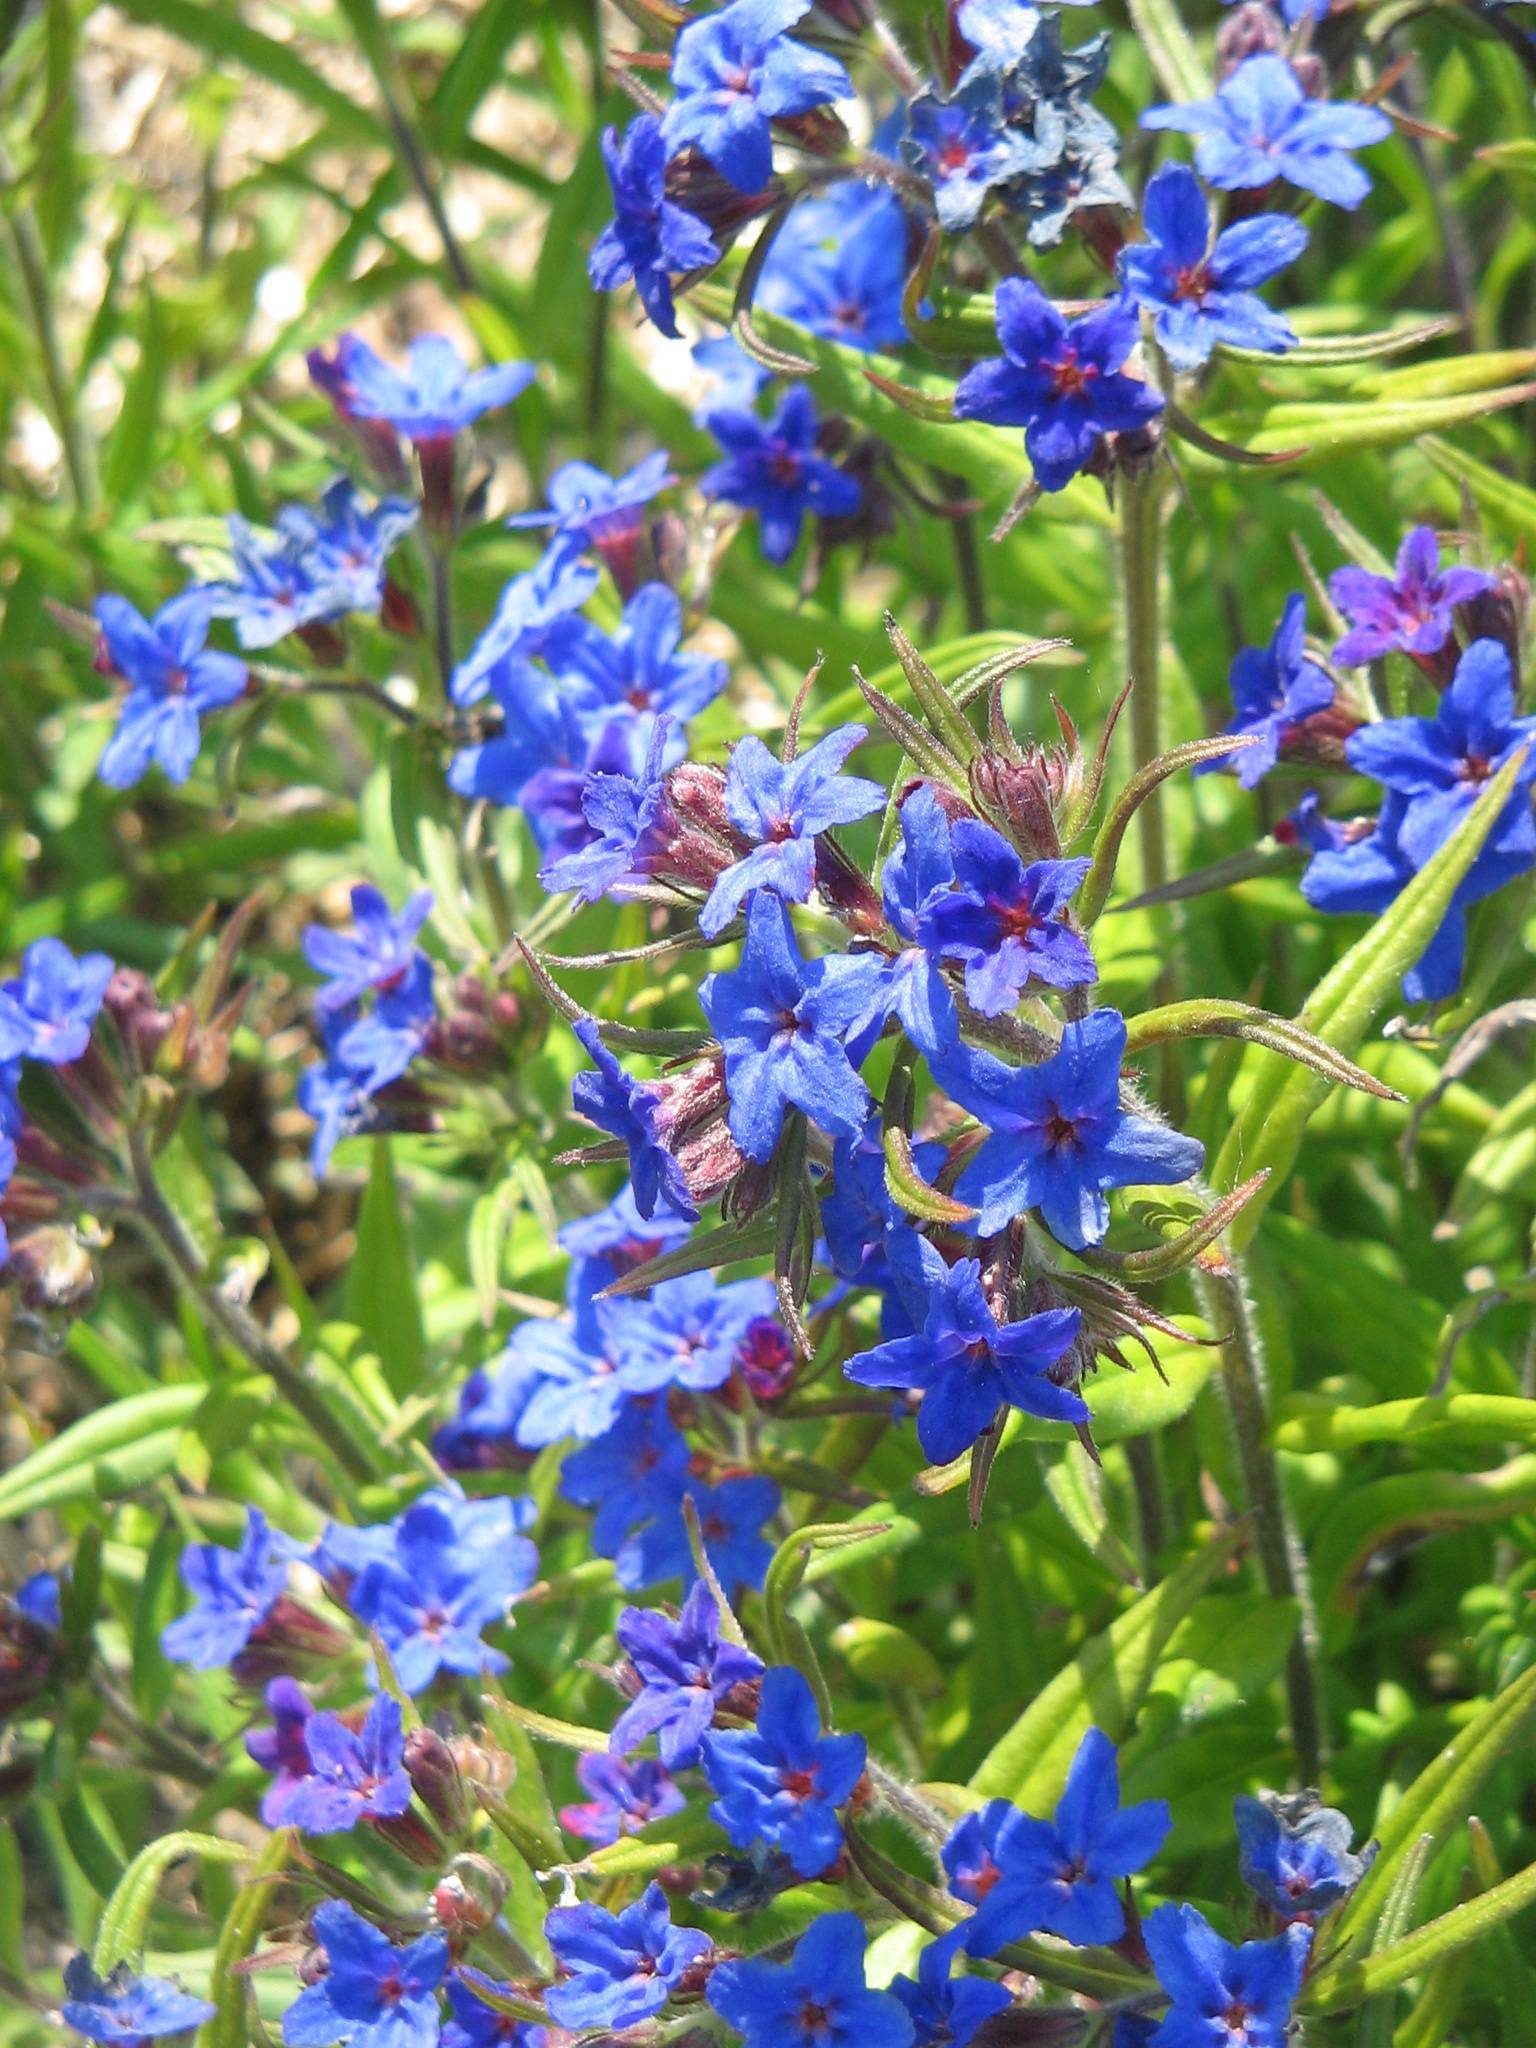 blue flowers with purple-green sepals and leaves with brown stems